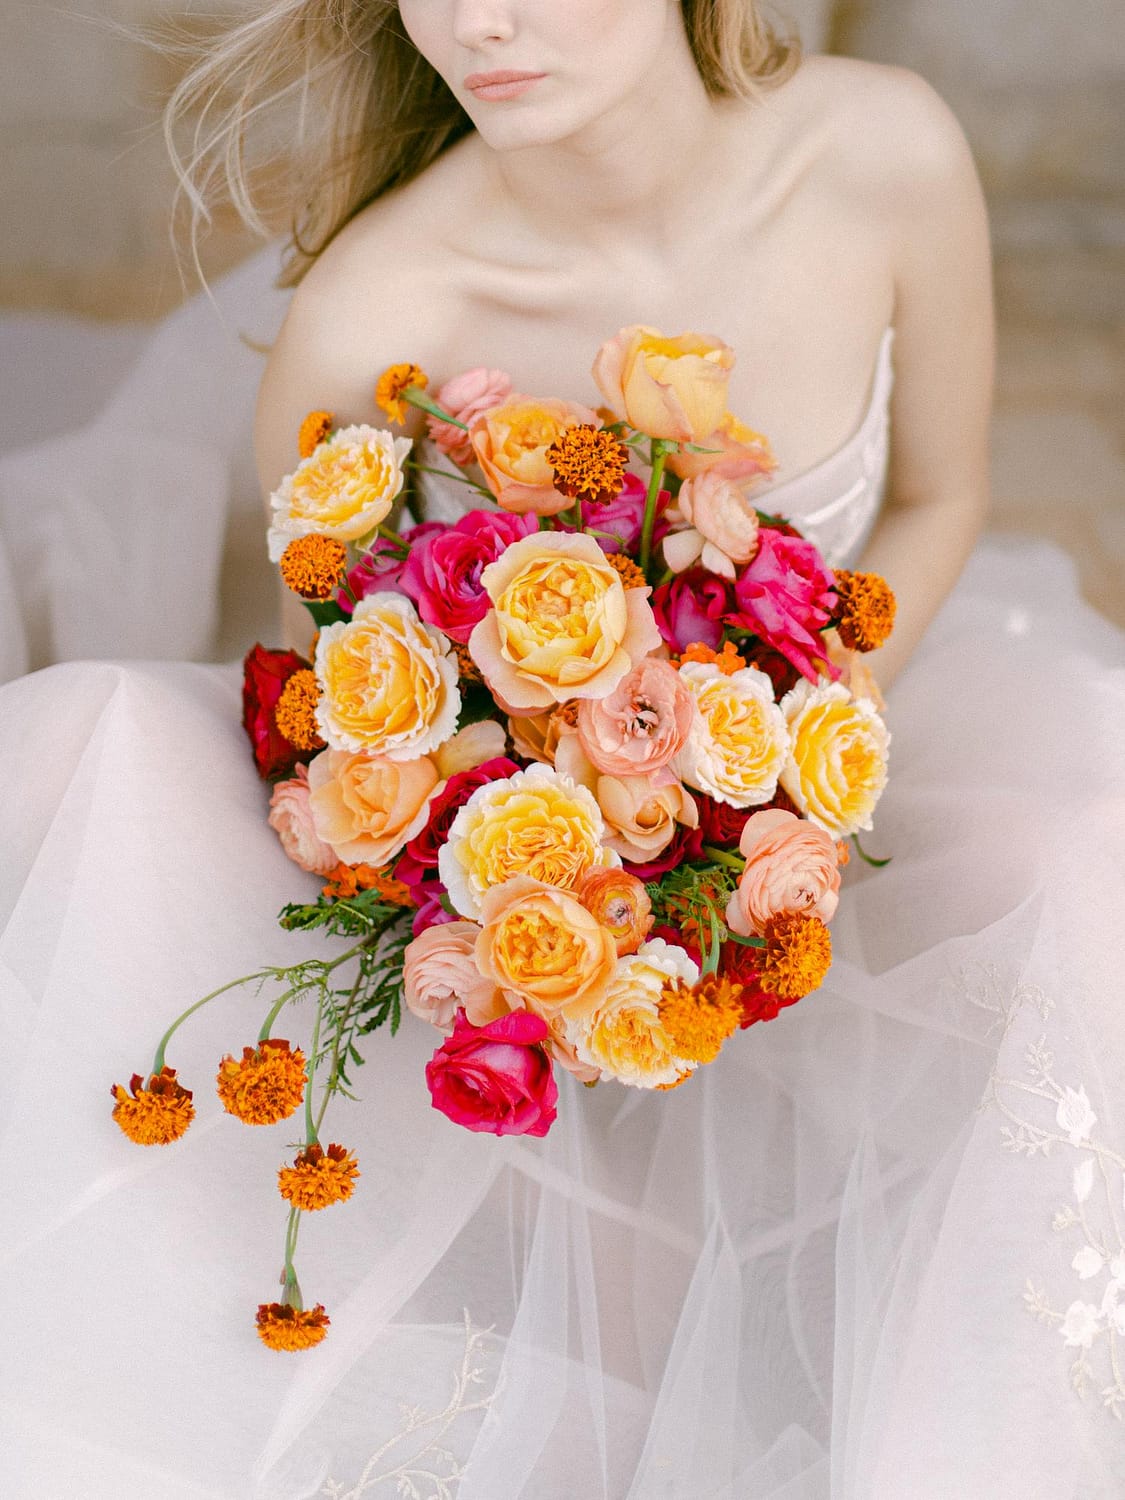 Bright Wedding Flowers For A Bridal Bouquet